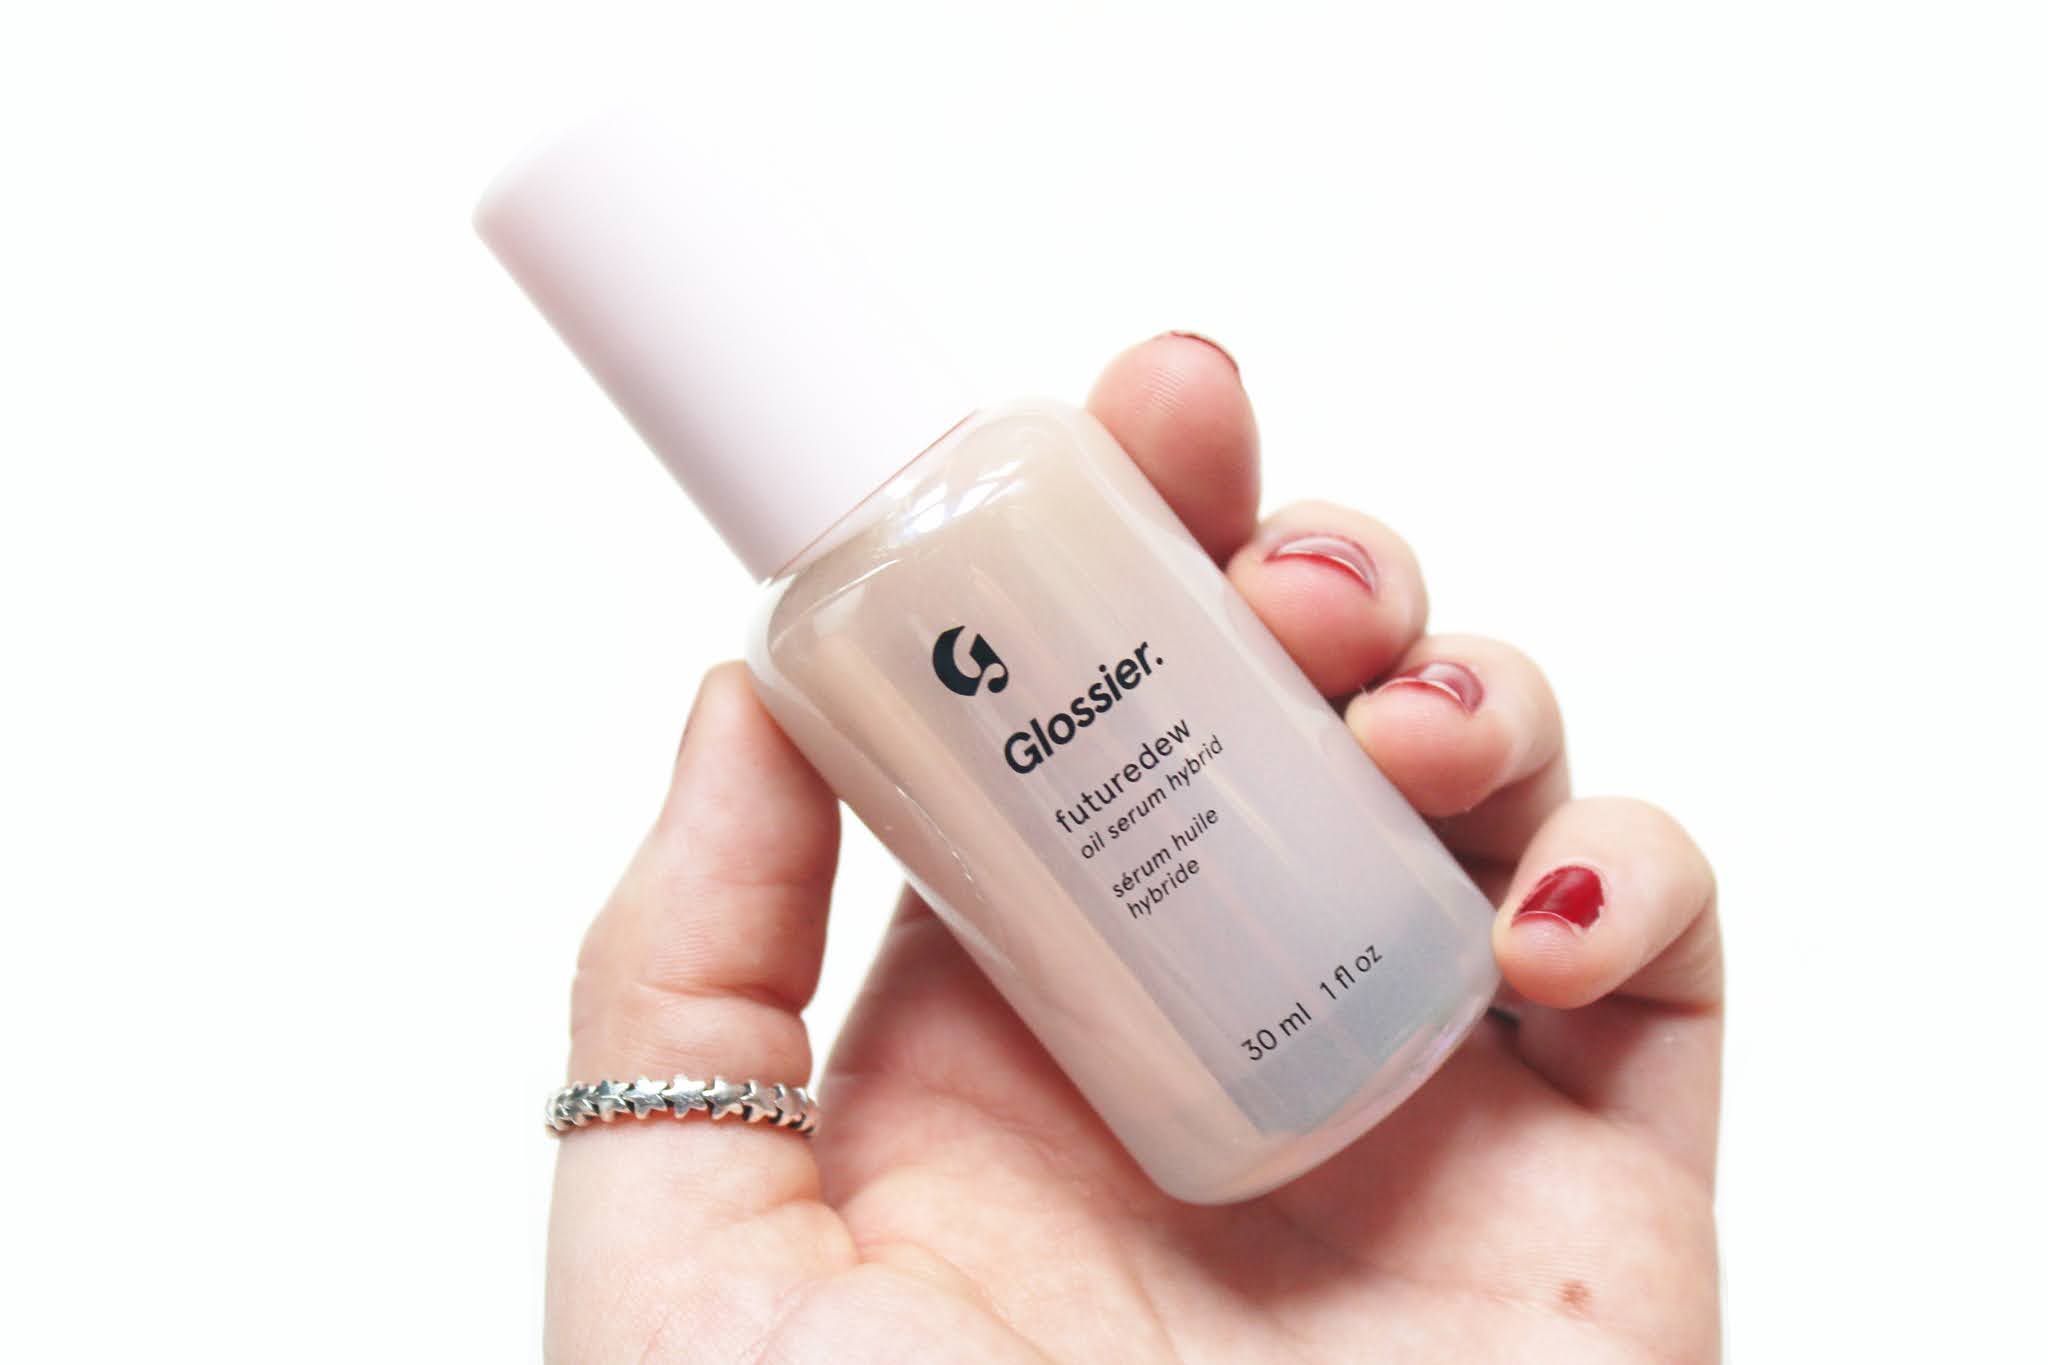 Glossier Futuredew Review (+ Discount Code)